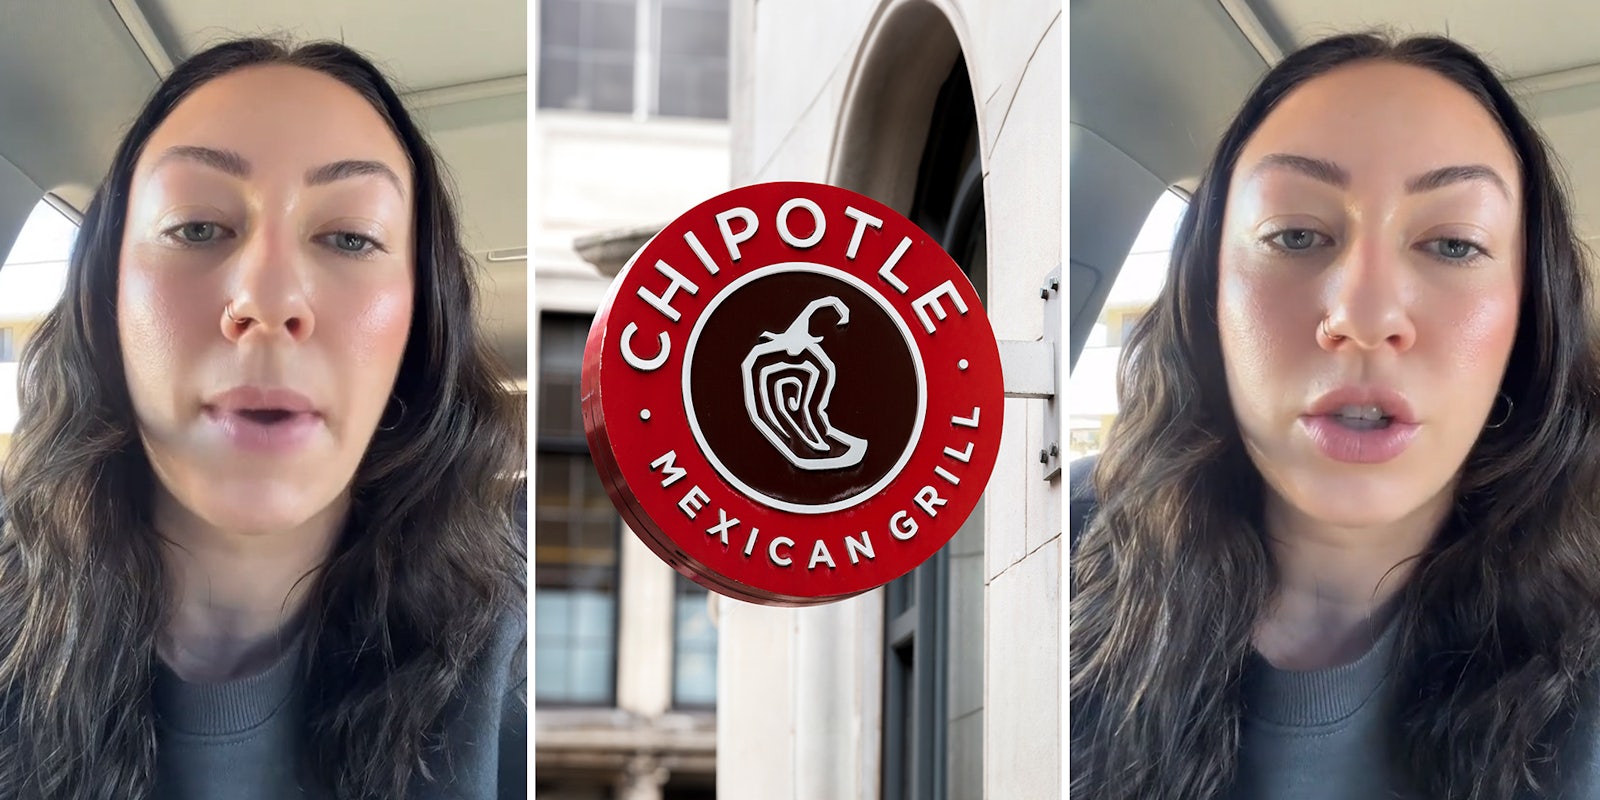 Woman says young Chipotle worker didn’t know how to take payment in cash